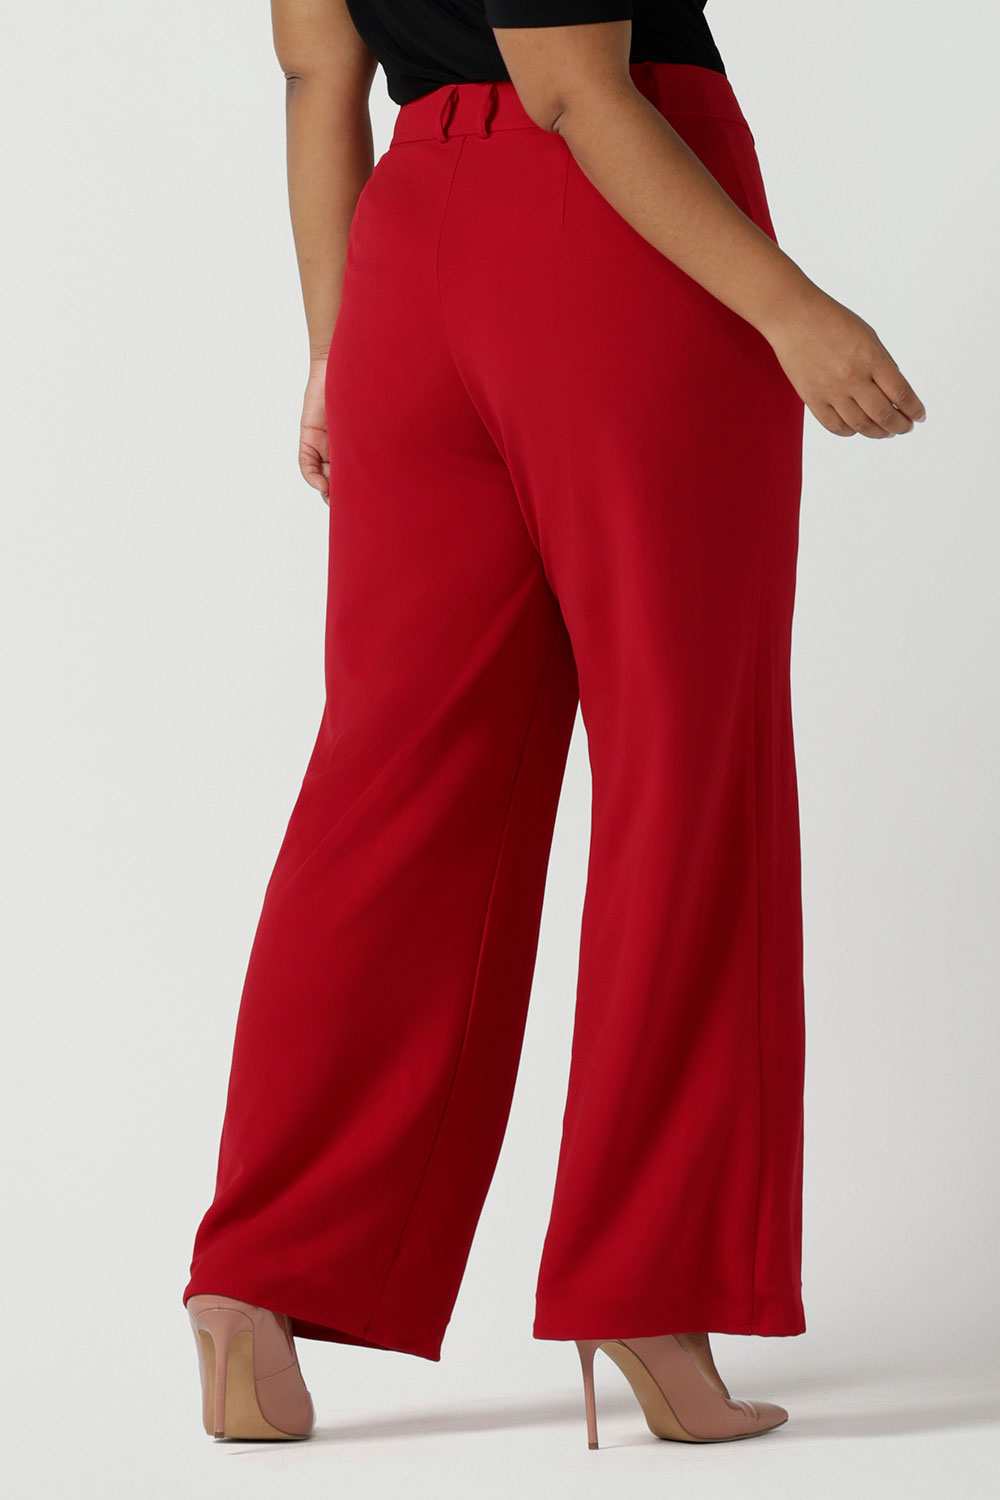 Back view of a size 16 woman wears the Drew pant in red, high waist and invisible fly front. Tailored belt loops and wide leg. Made in Australia for women. Stylish corporate wear for women. Made in Australia size 8 - 24.